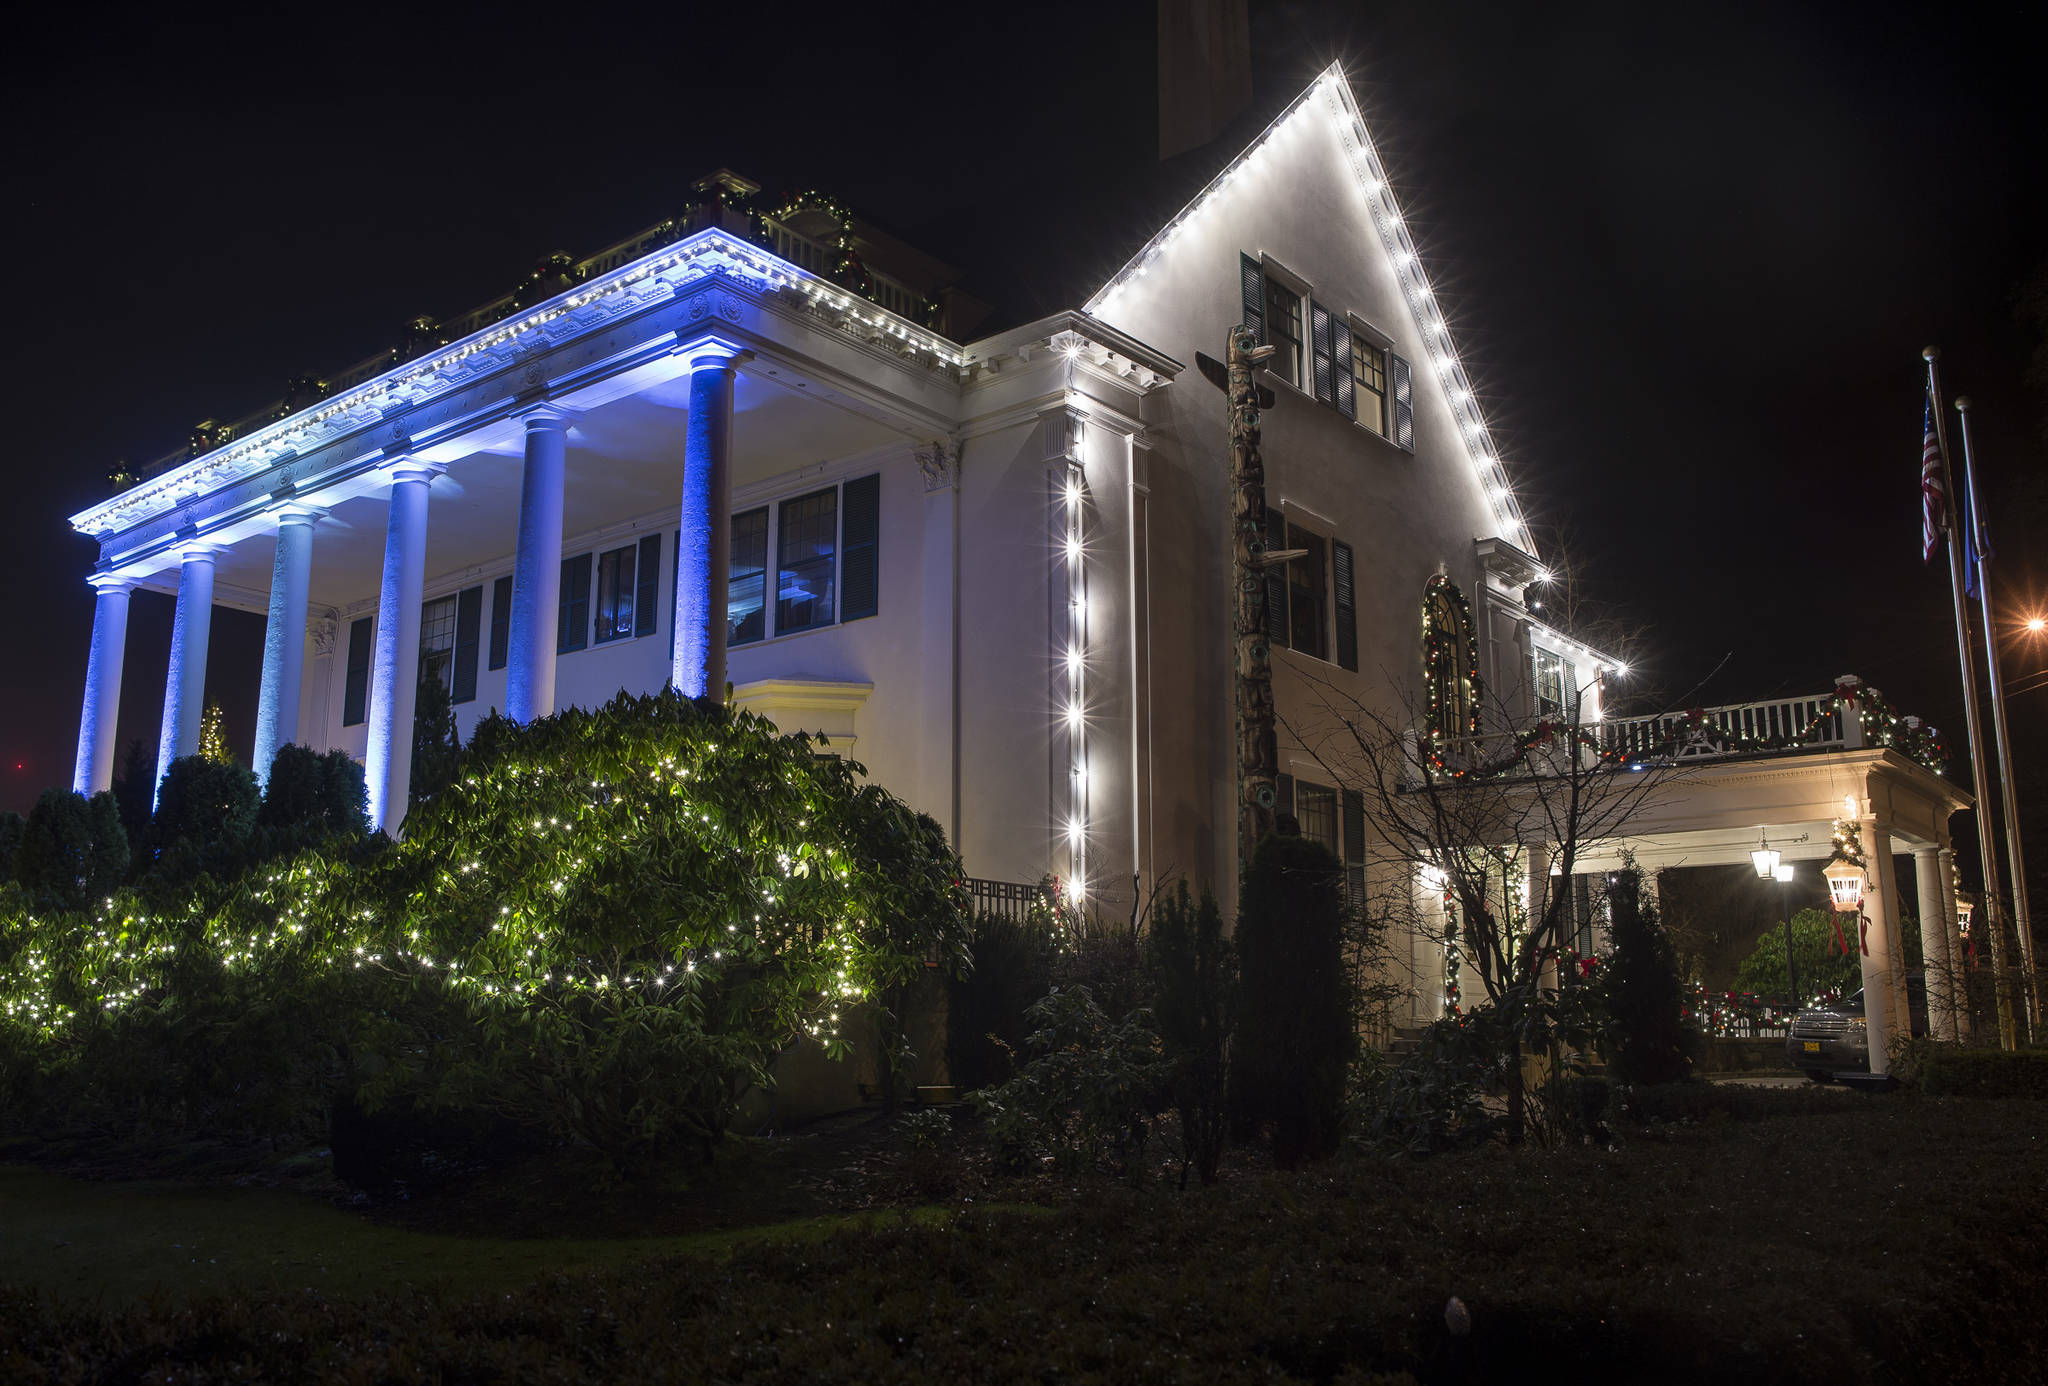 The Governor’s Mansion, ready for the holidays, is pictured on Thursday, Nov. 29, 2018. (Michael Penn | Juneau Empire)